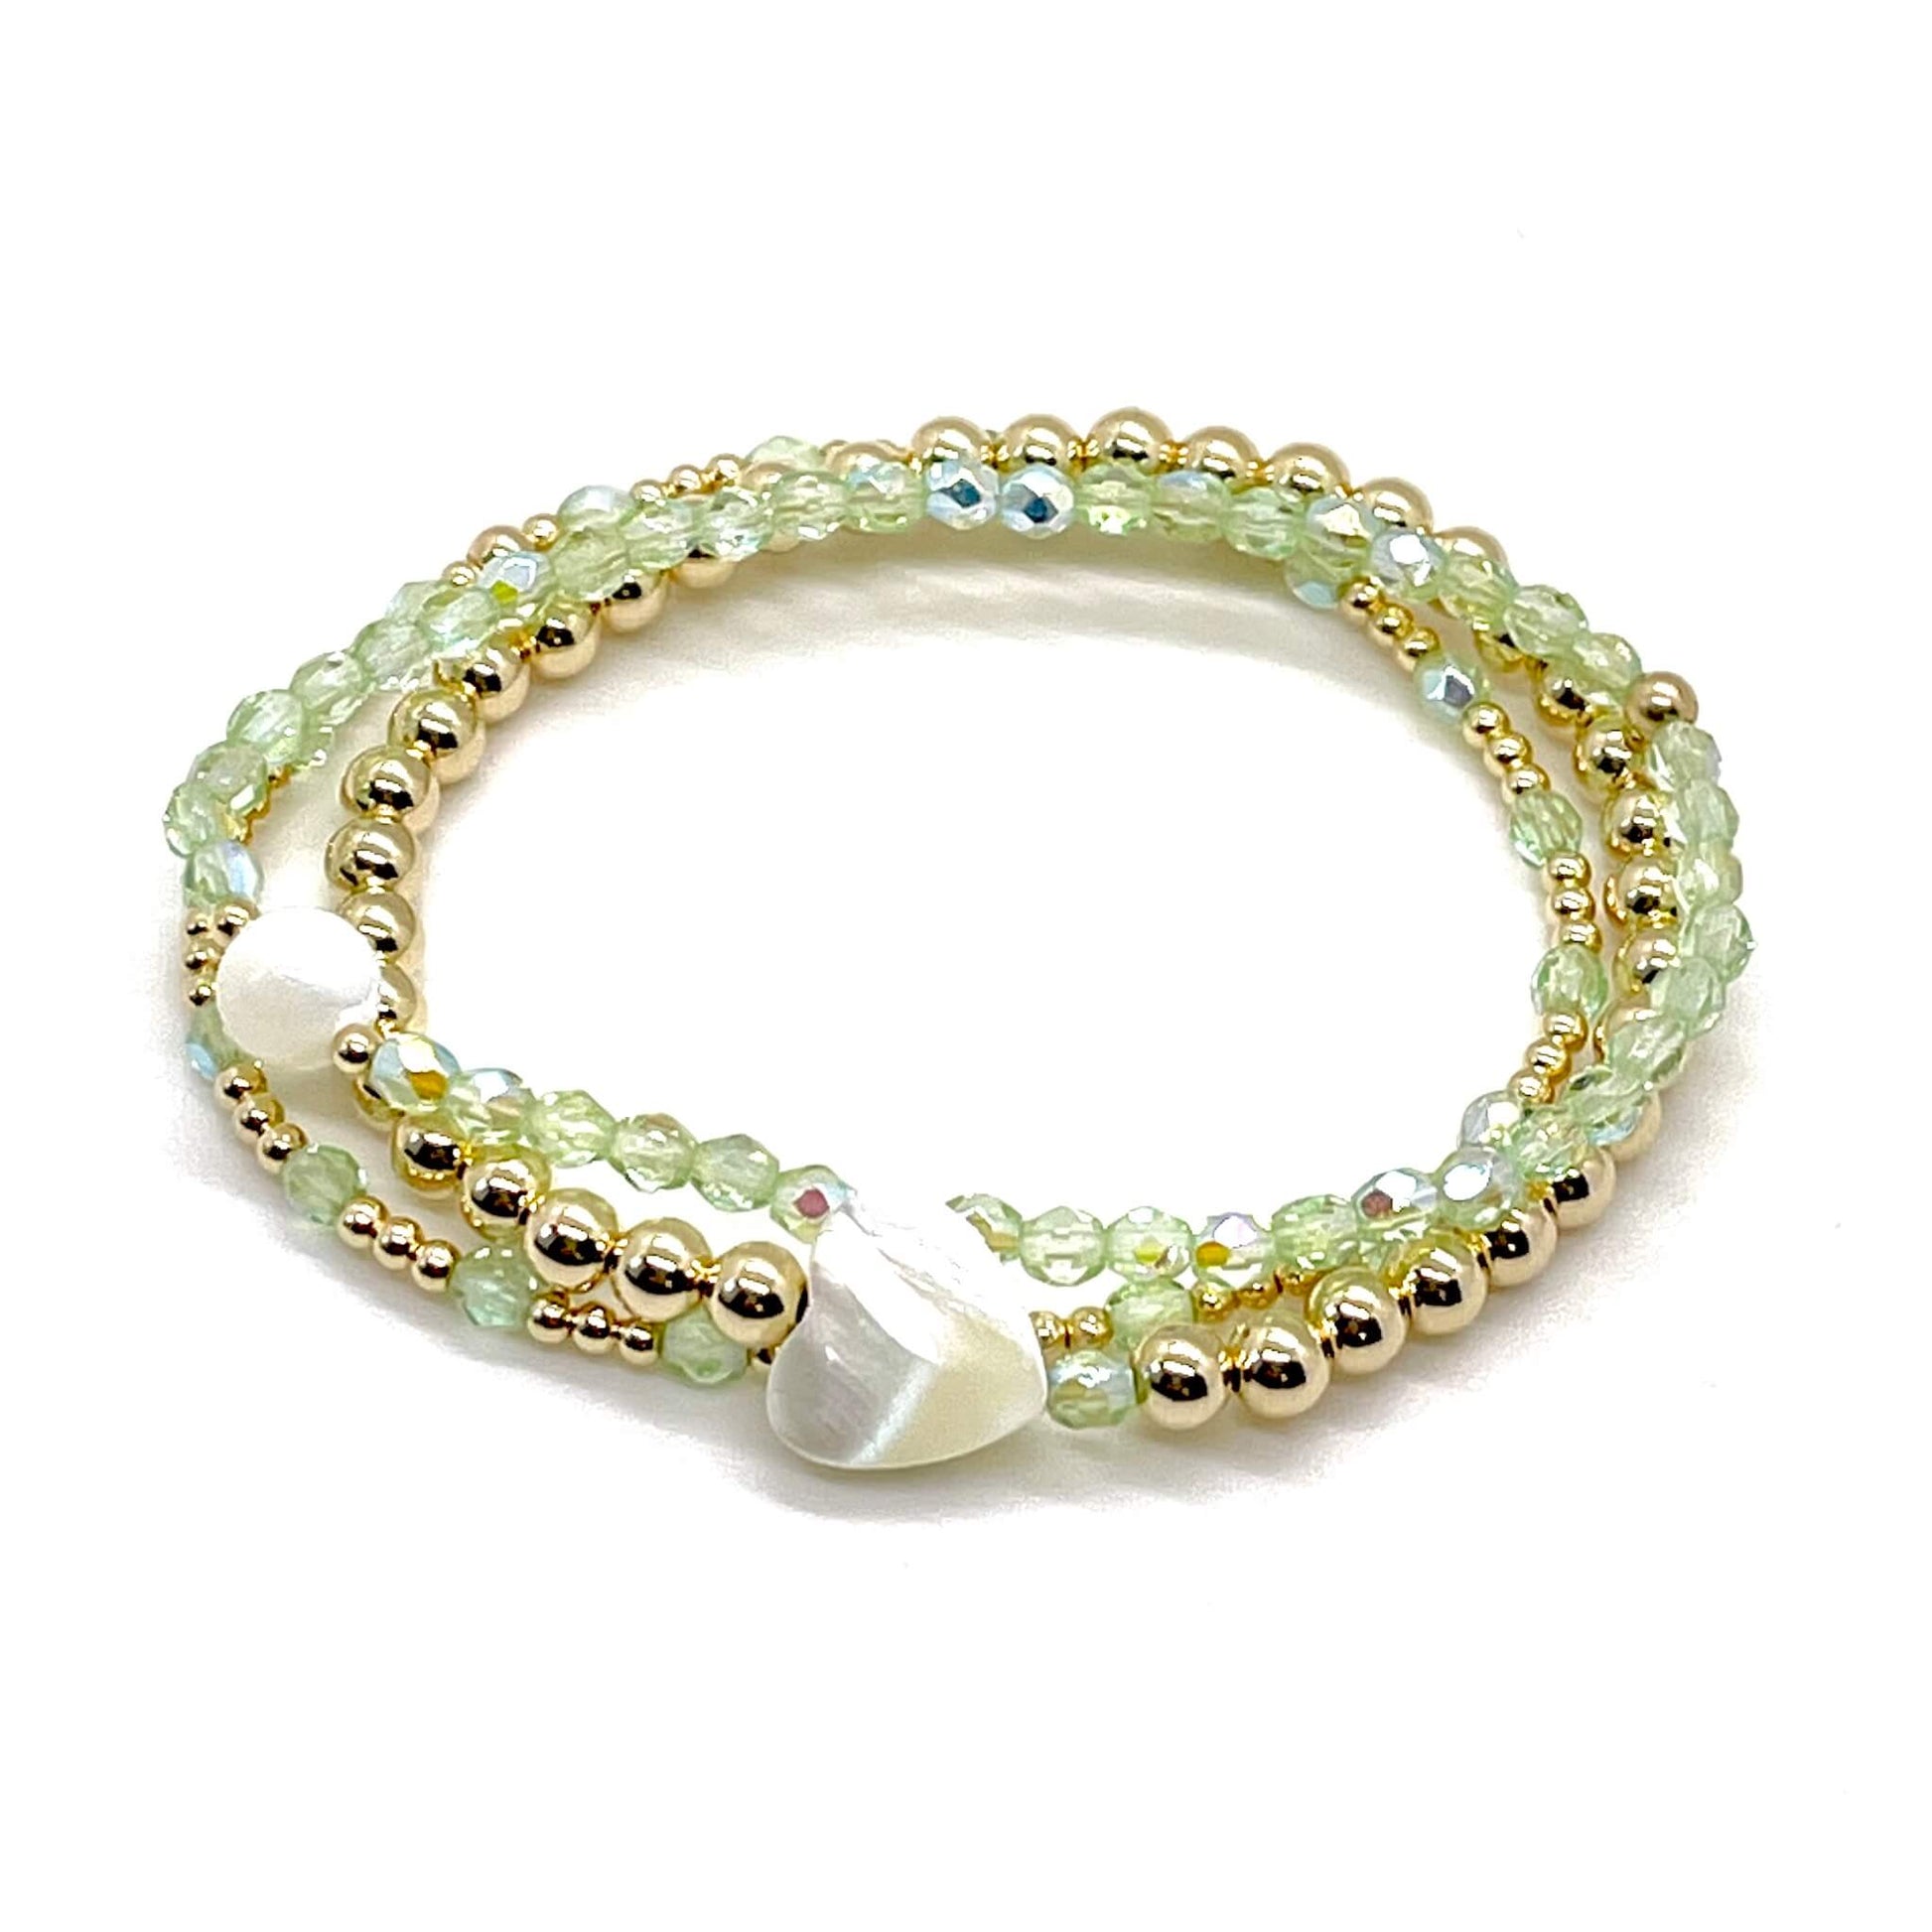 Peridot crystal and gold bracelet stack of 3. Womens handmade stretch bracelets wtih round and heart shaped mother-of-pearl accent beads.